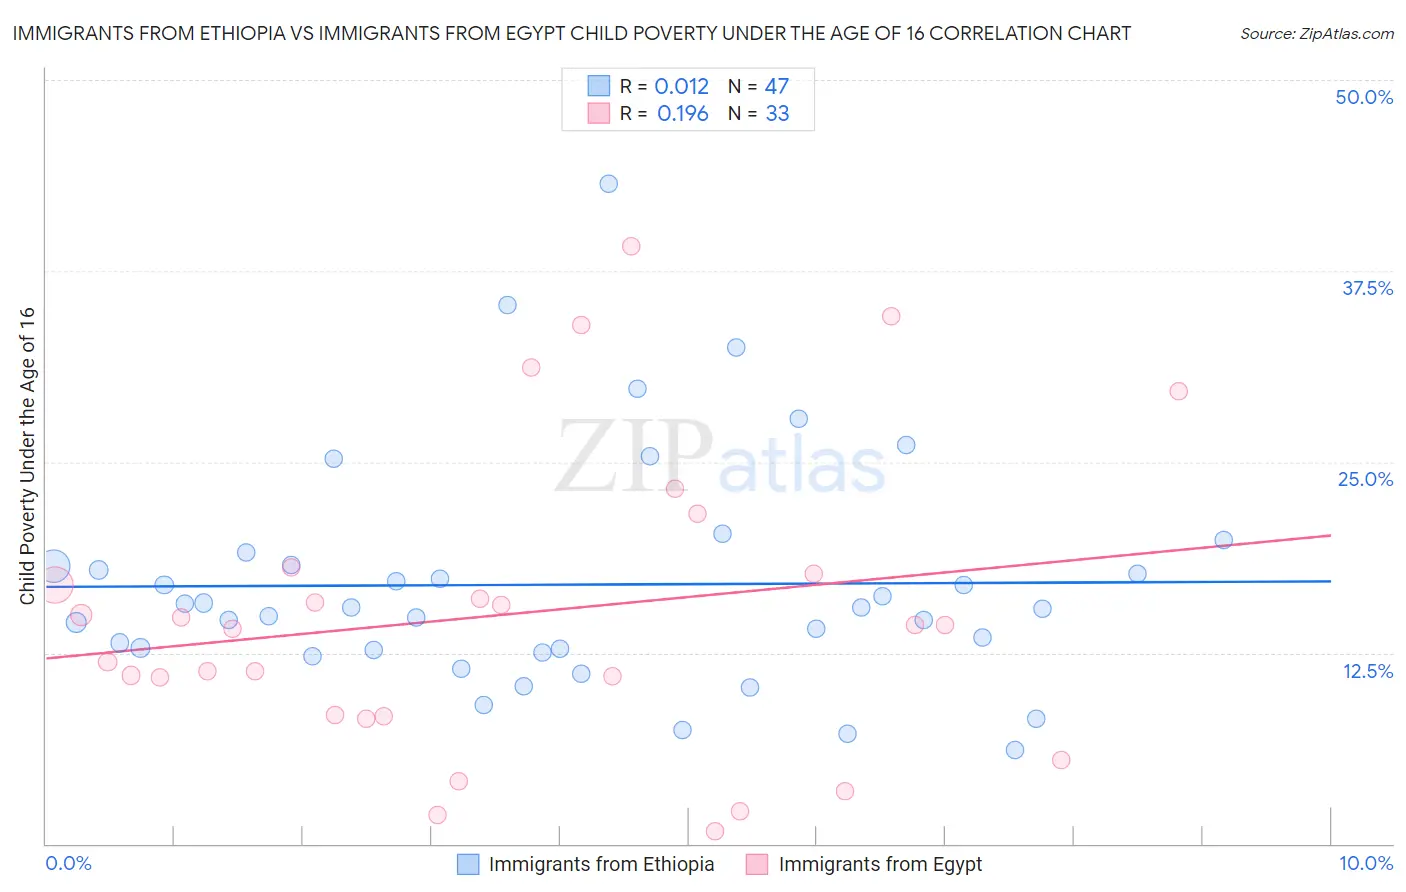 Immigrants from Ethiopia vs Immigrants from Egypt Child Poverty Under the Age of 16